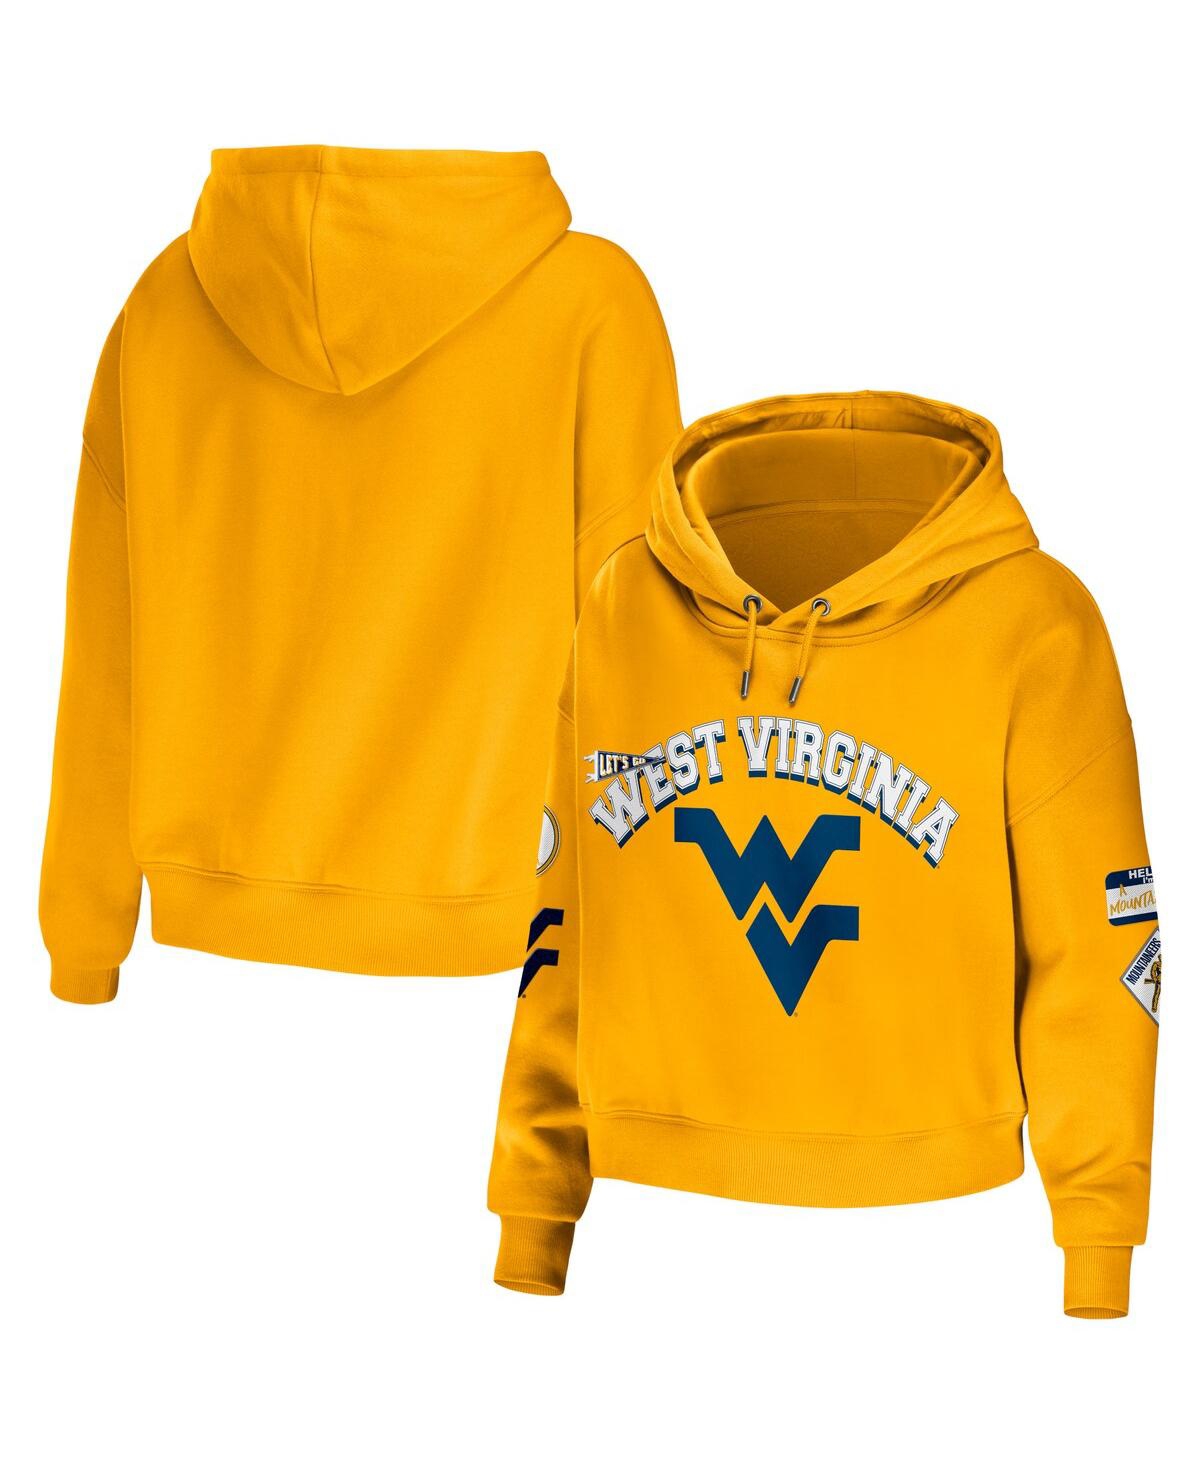 Shop Wear By Erin Andrews Women's  Gold West Virginia Mountaineers Mixed Media Cropped Pullover Hoodie